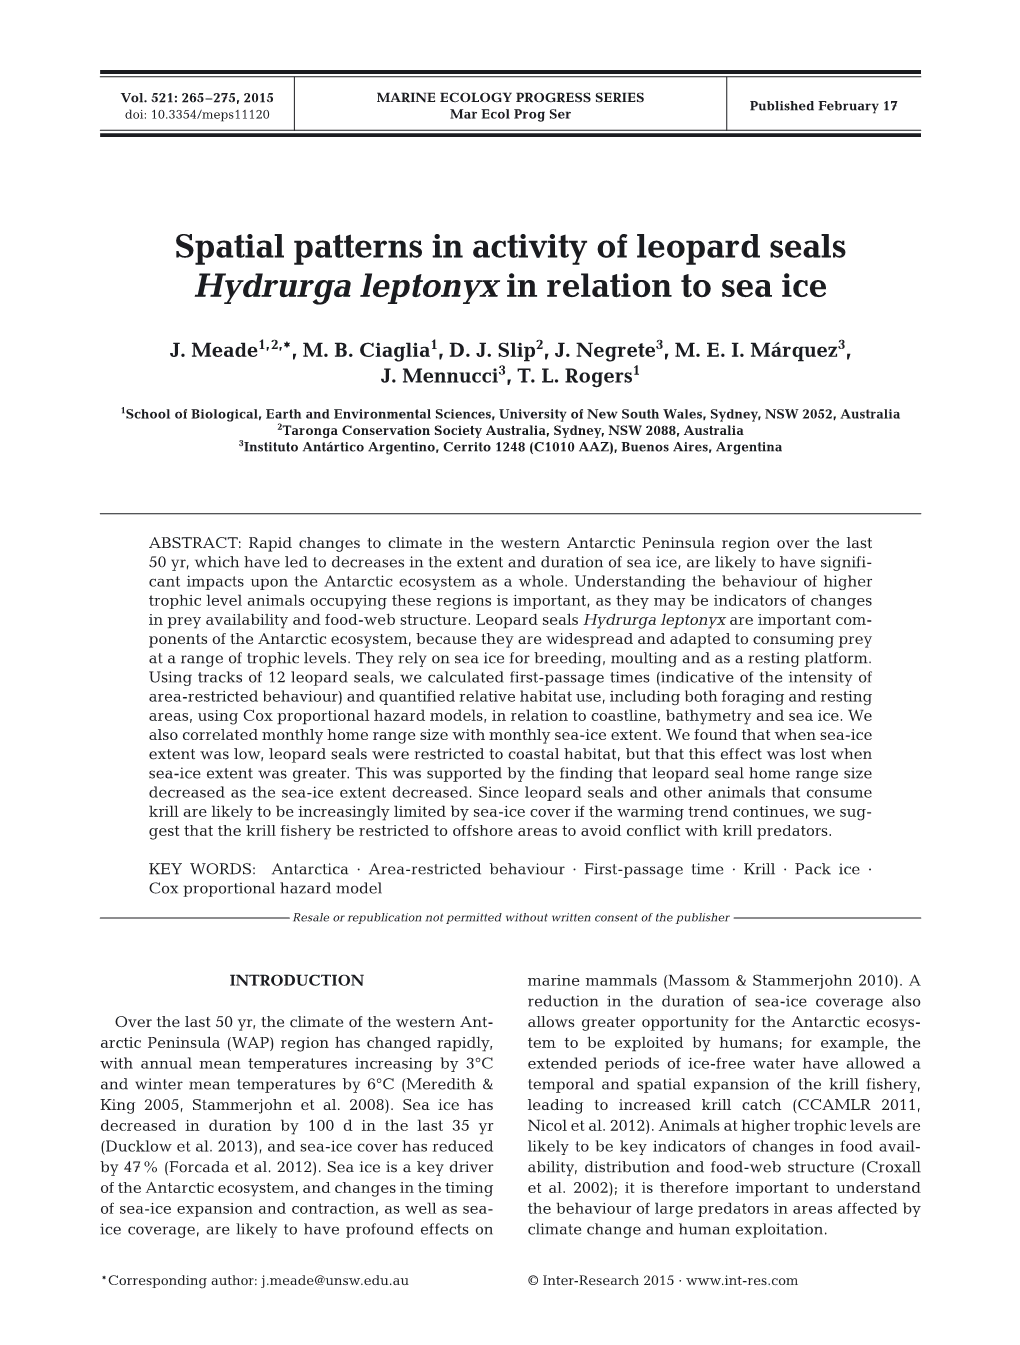 Spatial Patterns in Activity of Leopard Seals Hydrurga Leptonyx in Relation to Sea Ice